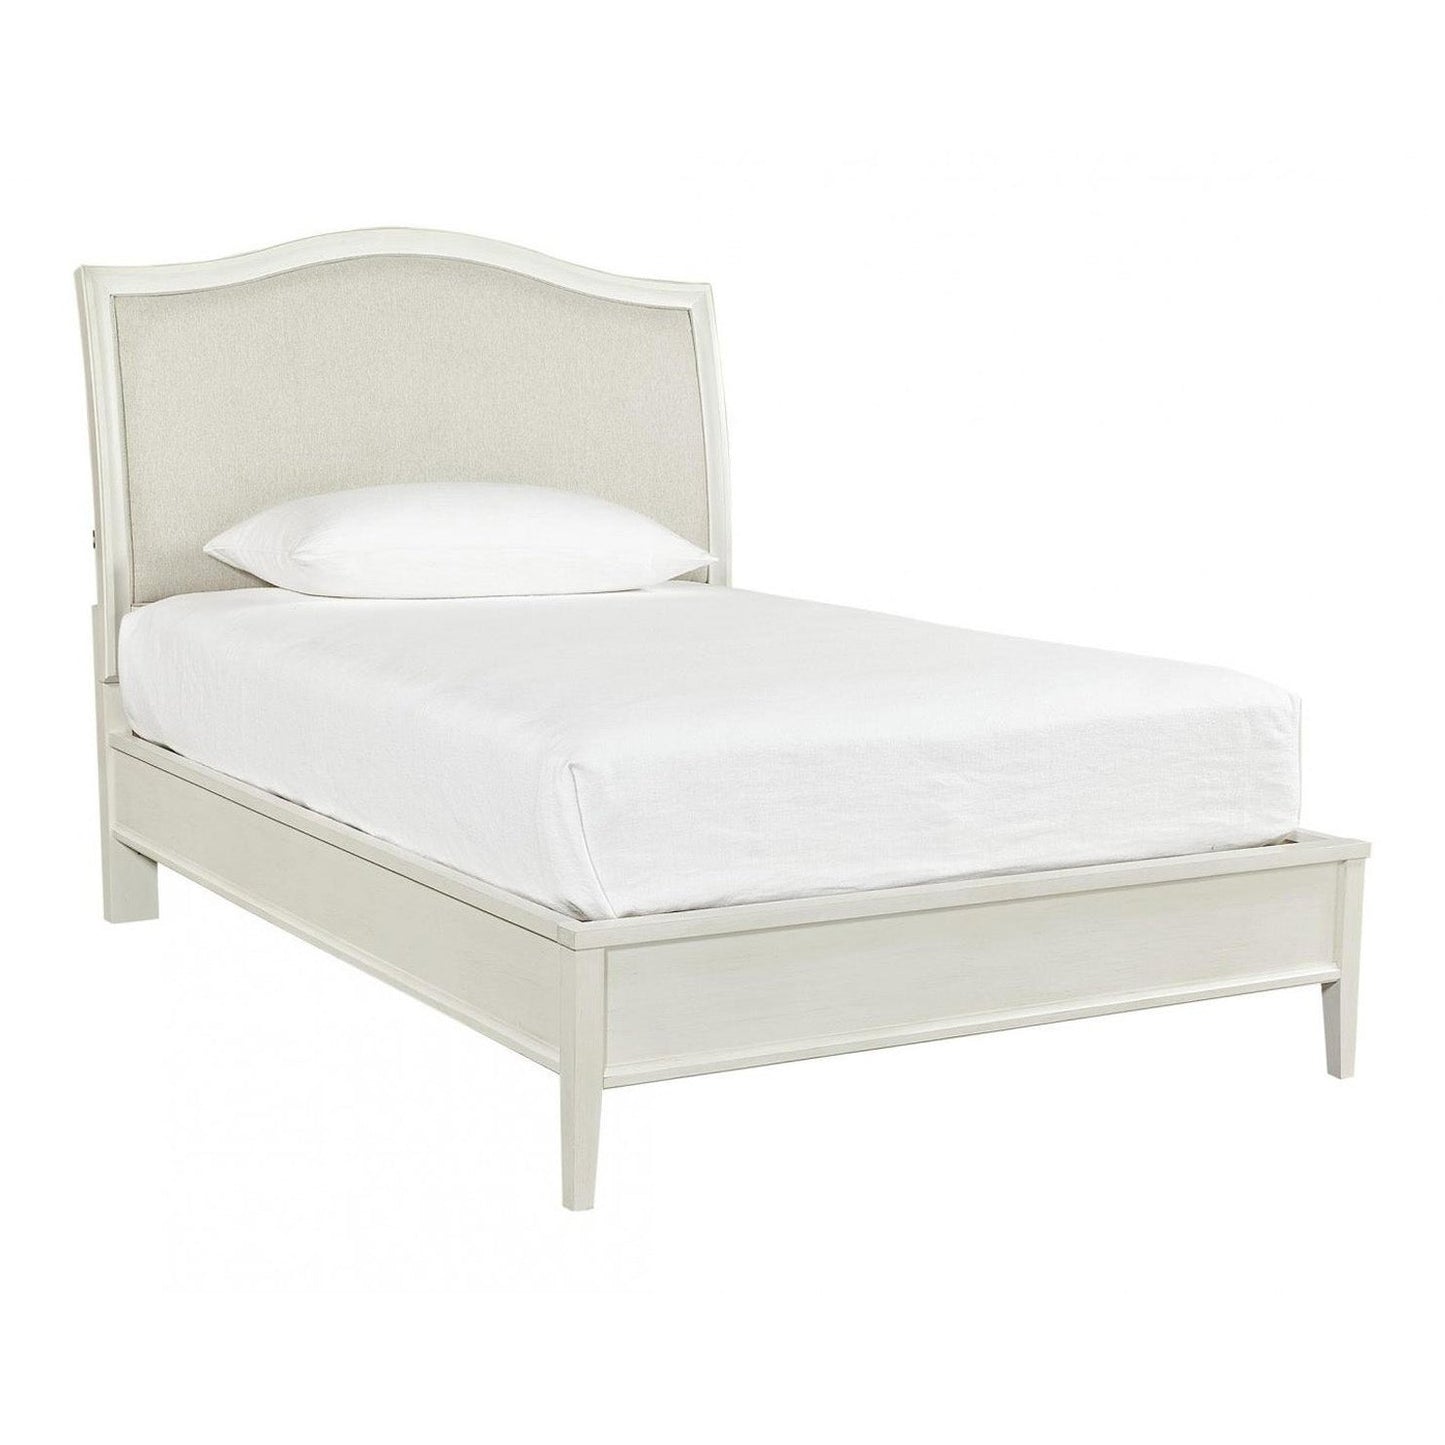 CHARLOTTE TWIN BED